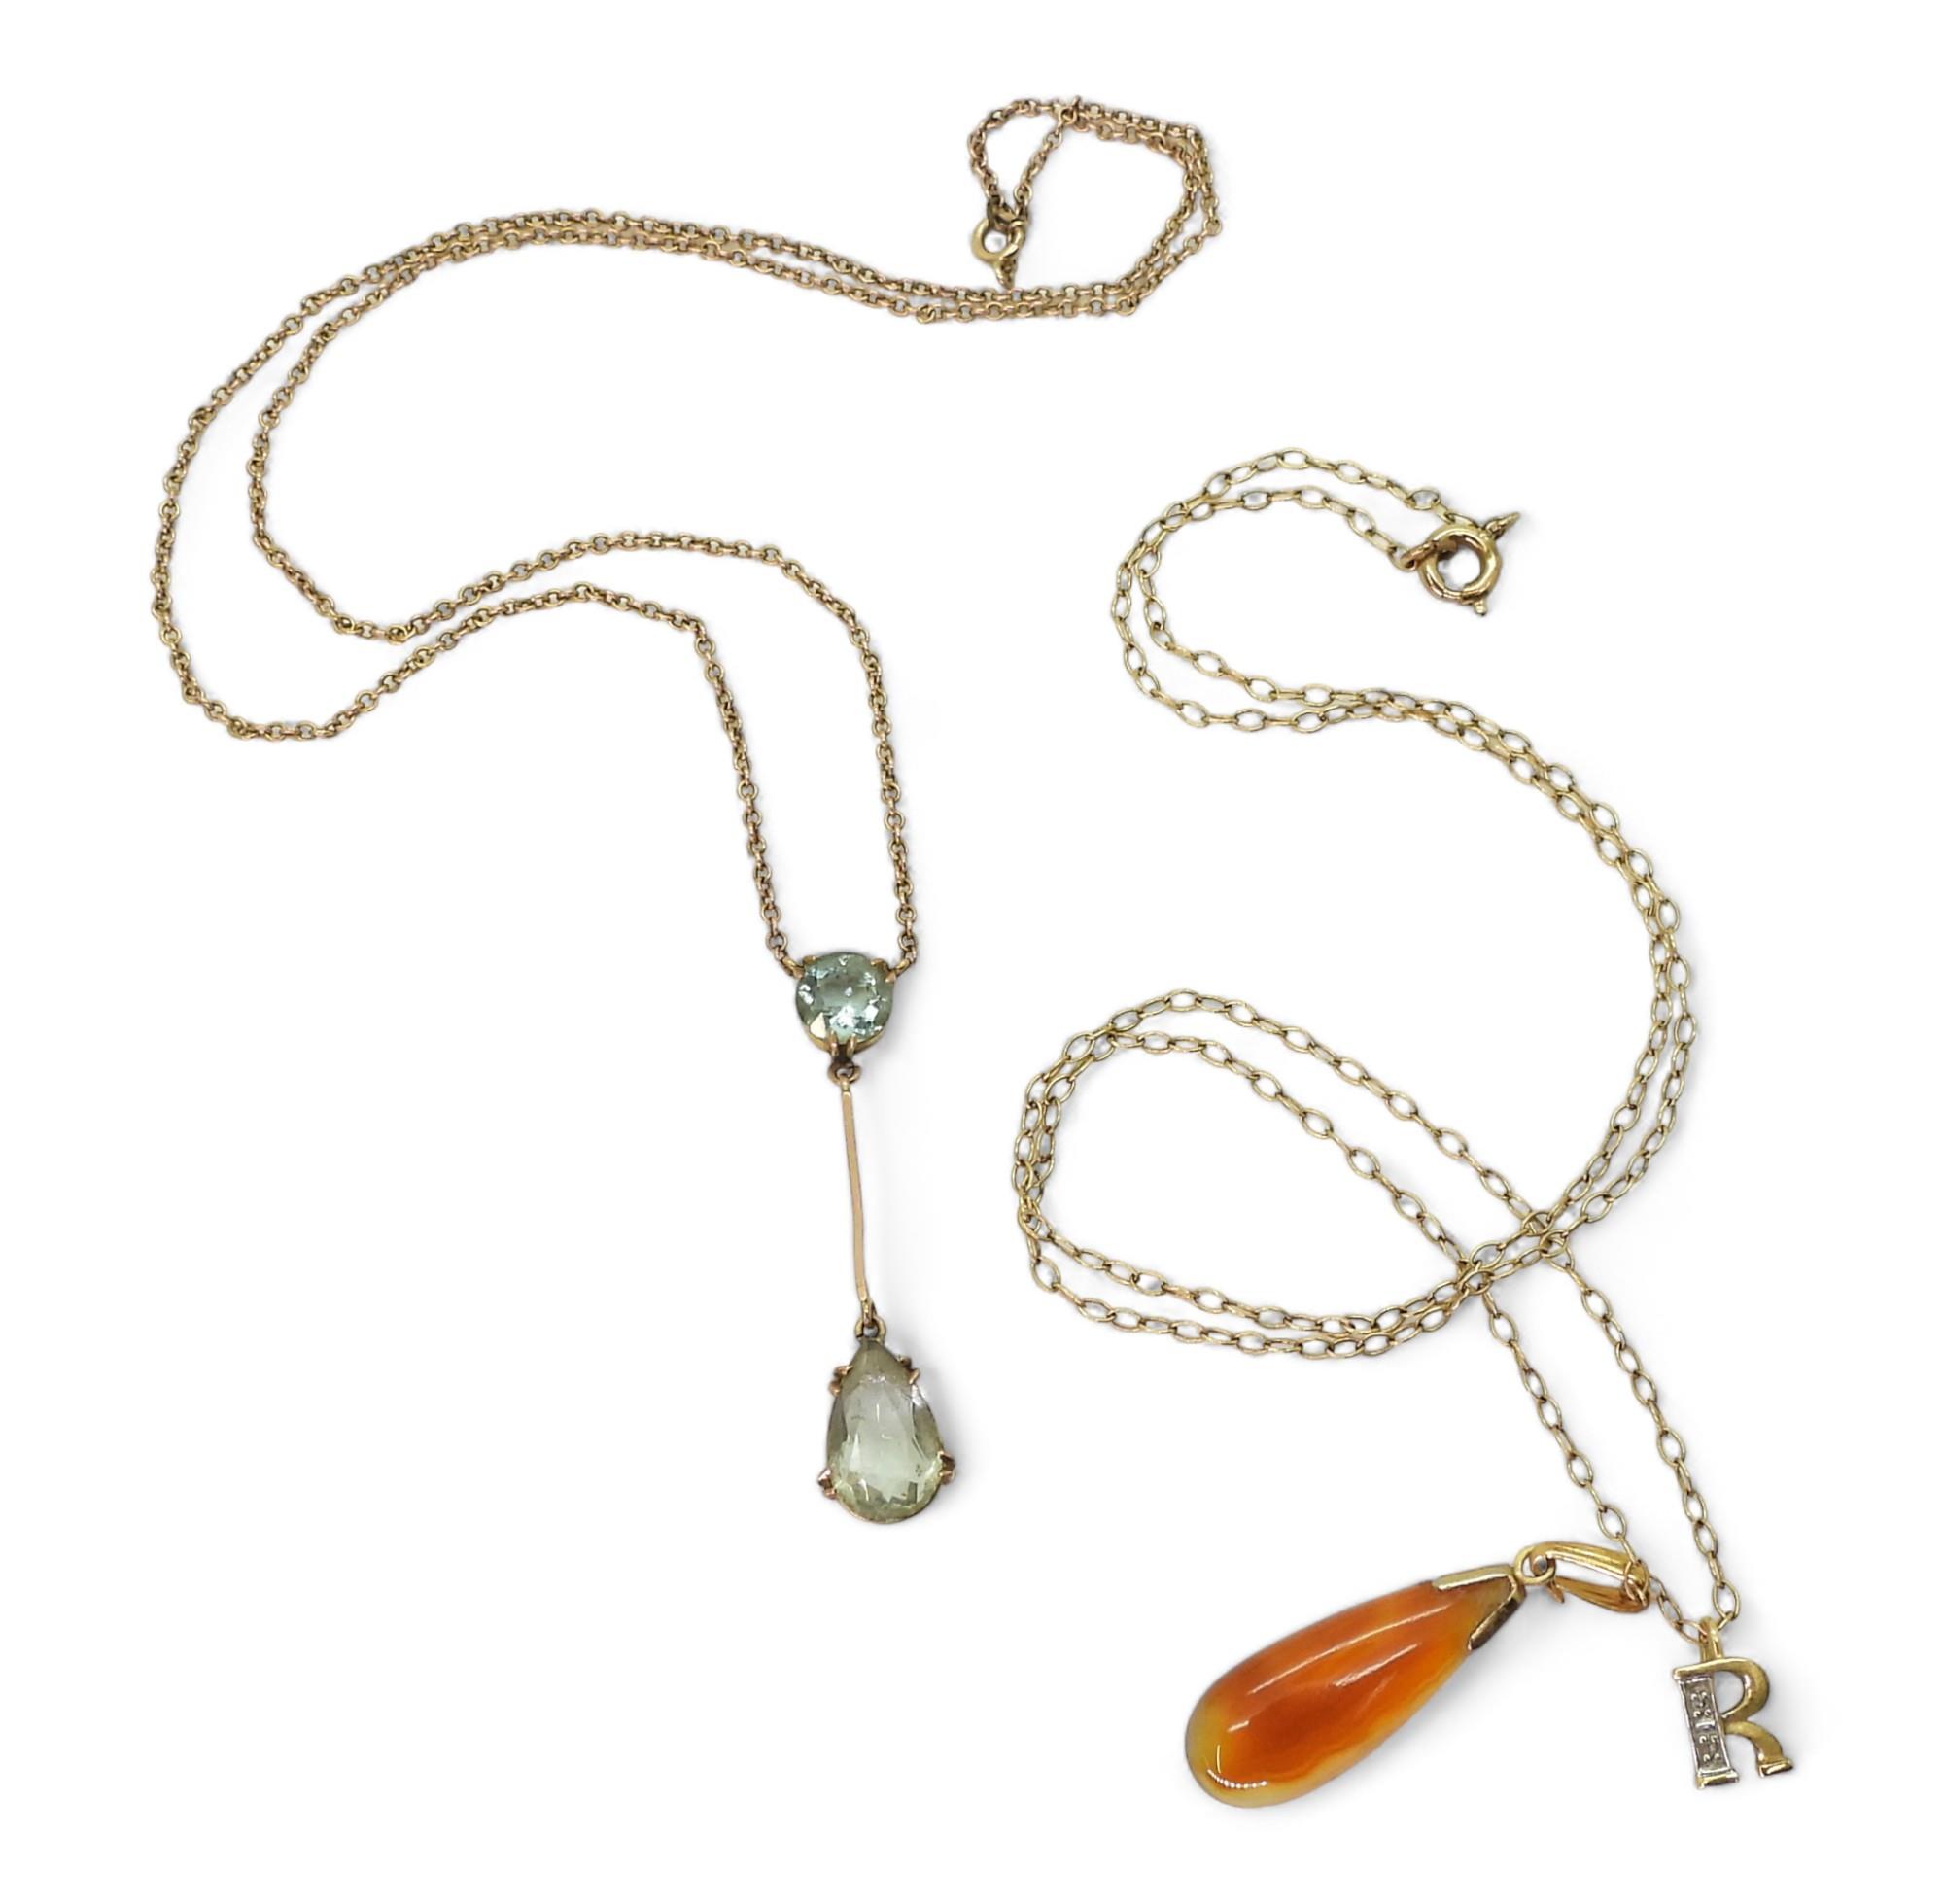 An 18ct and diamond 'R' pendant, weight 0.5gms,  9ct gold aquamarine pendant necklace, and a 9ct